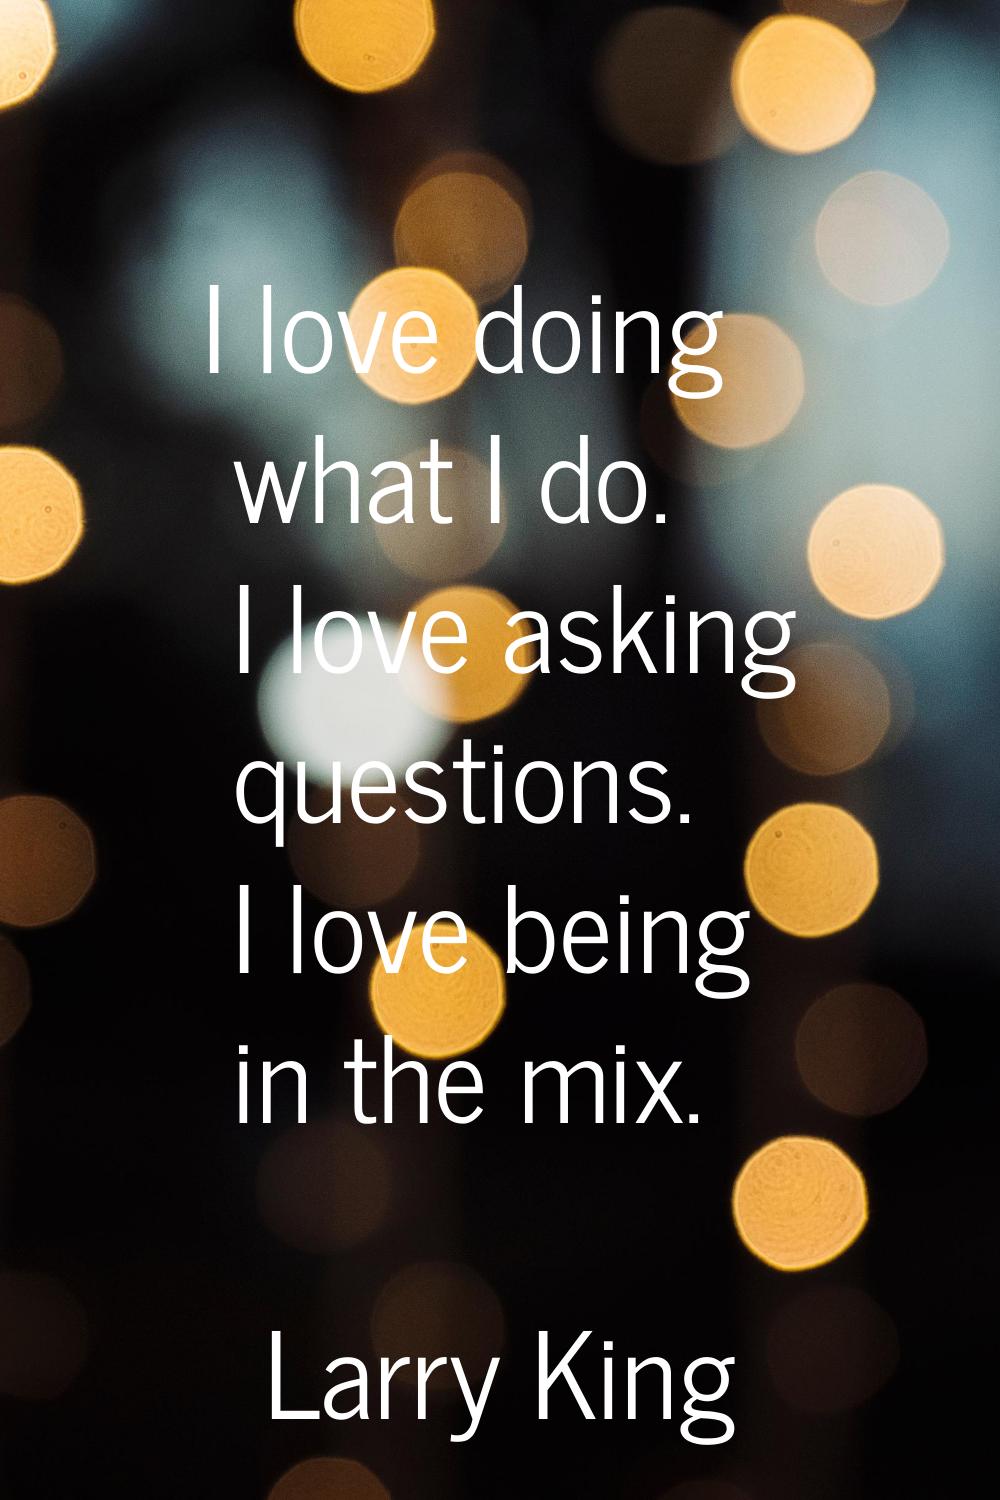 I love doing what I do. I love asking questions. I love being in the mix.